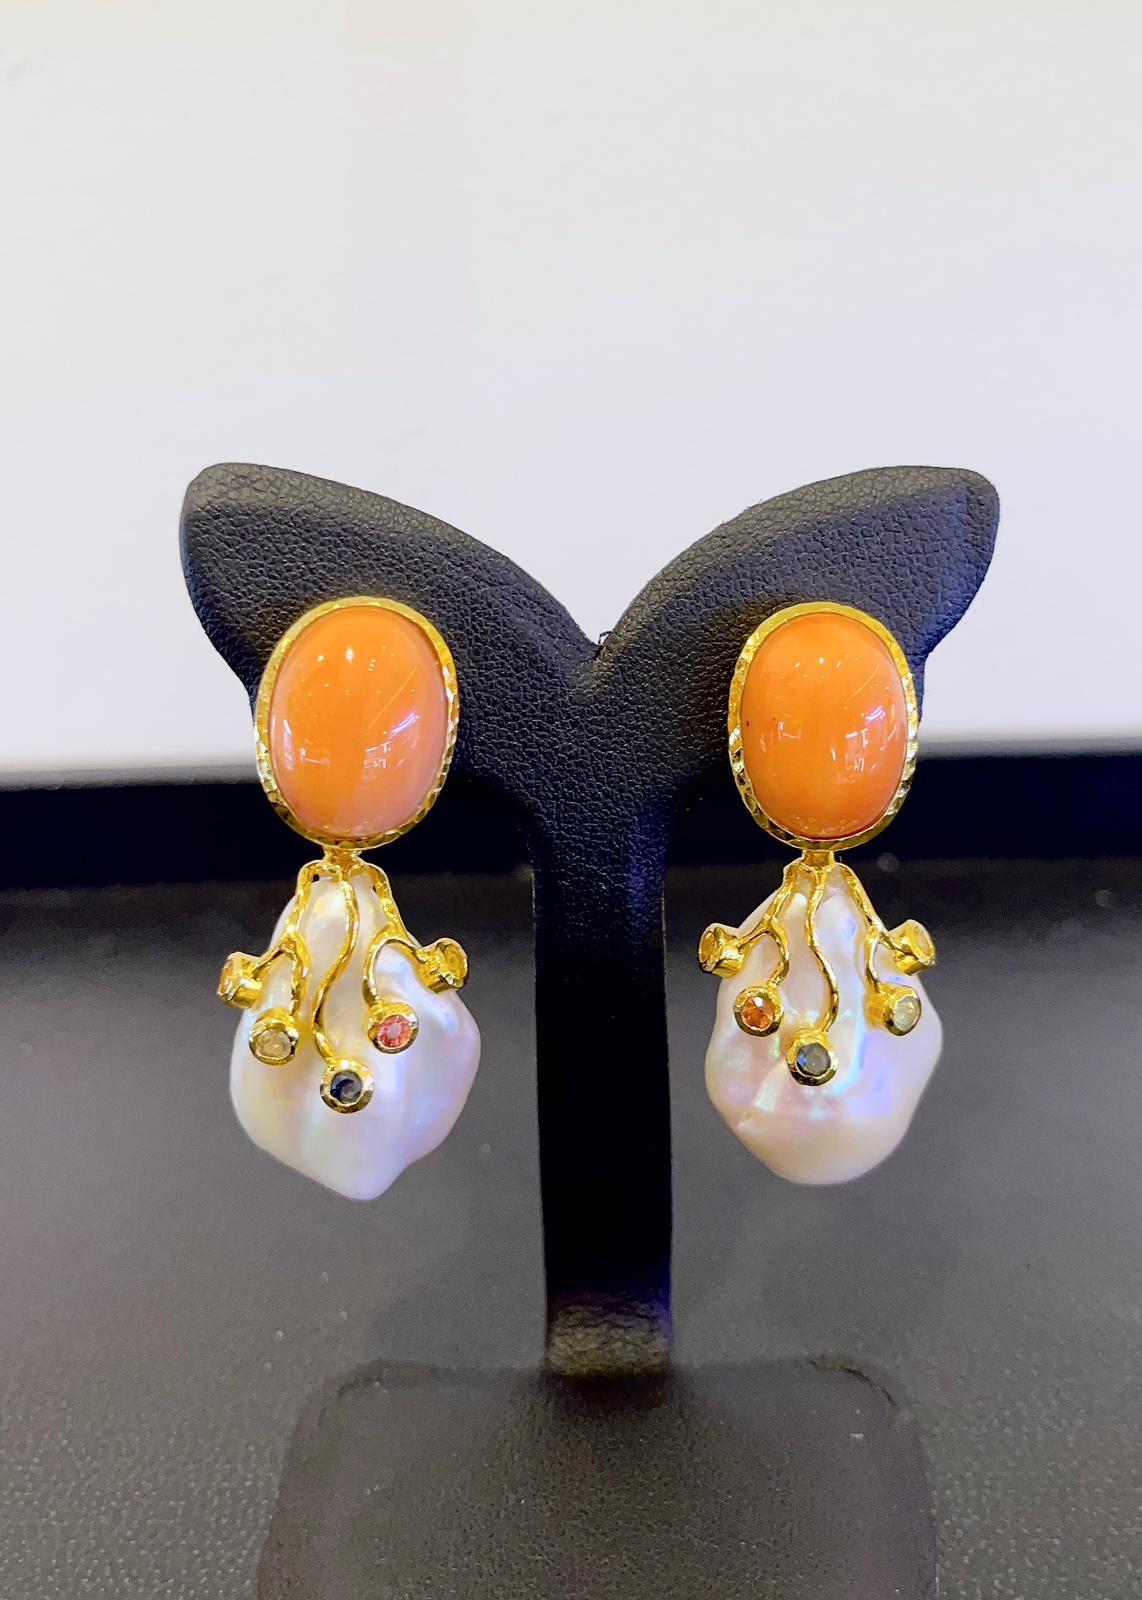 Bochic “Capri” Coral and Fancy Color Sapphire Earrings 
Drop earrings 
The coral is presses salmon coral 
Fancy color Natural, Blue, Pink, Yellow and Red Sapphires 
1.00 Carat 
Set in 22K Gold and Silver 
This earrings are the perfect cross between